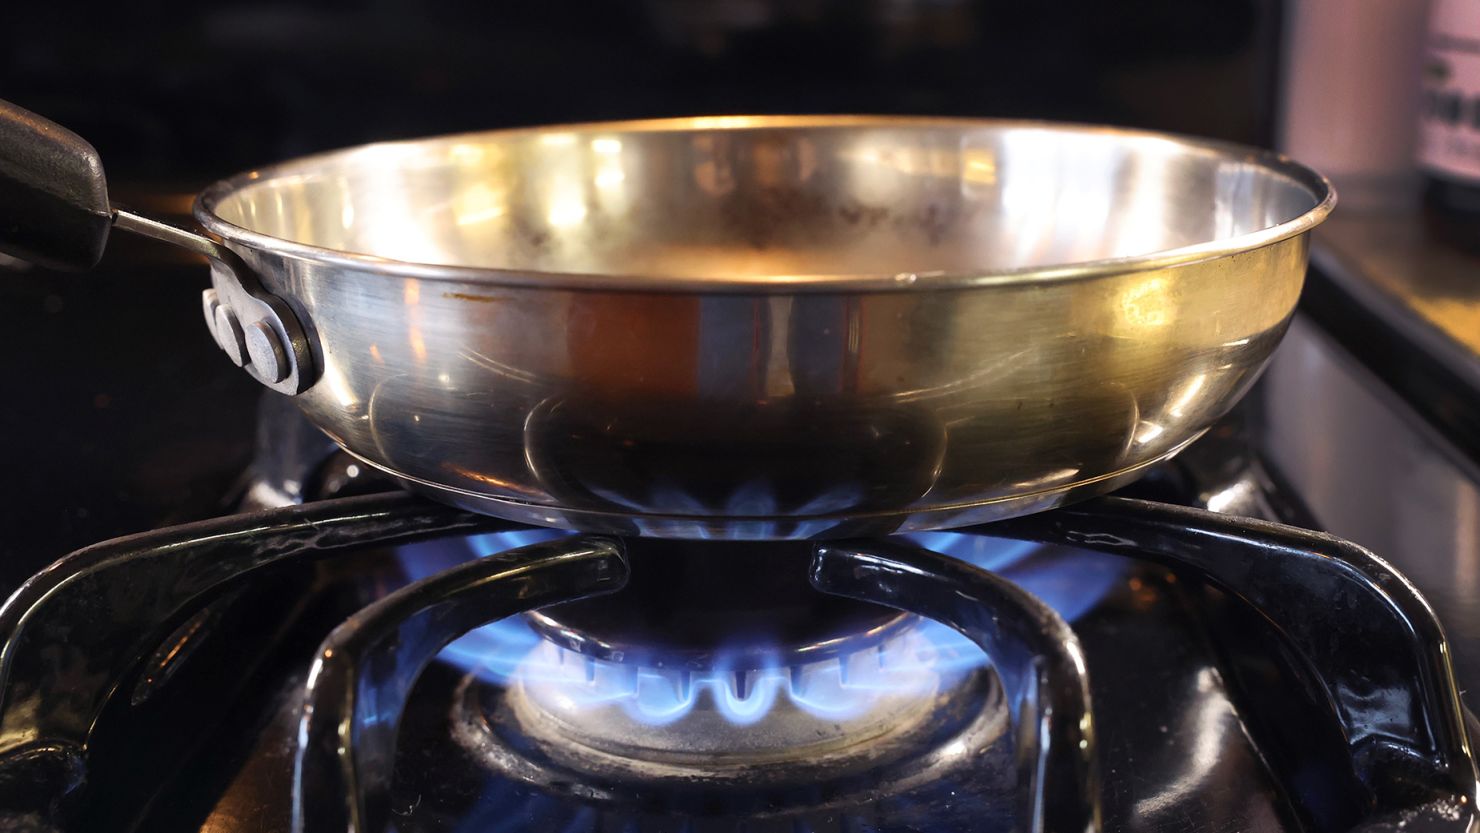 Harmful levels of nitrogen dioxide from cooking on gas stoves can be found throughout the home, a new study found.